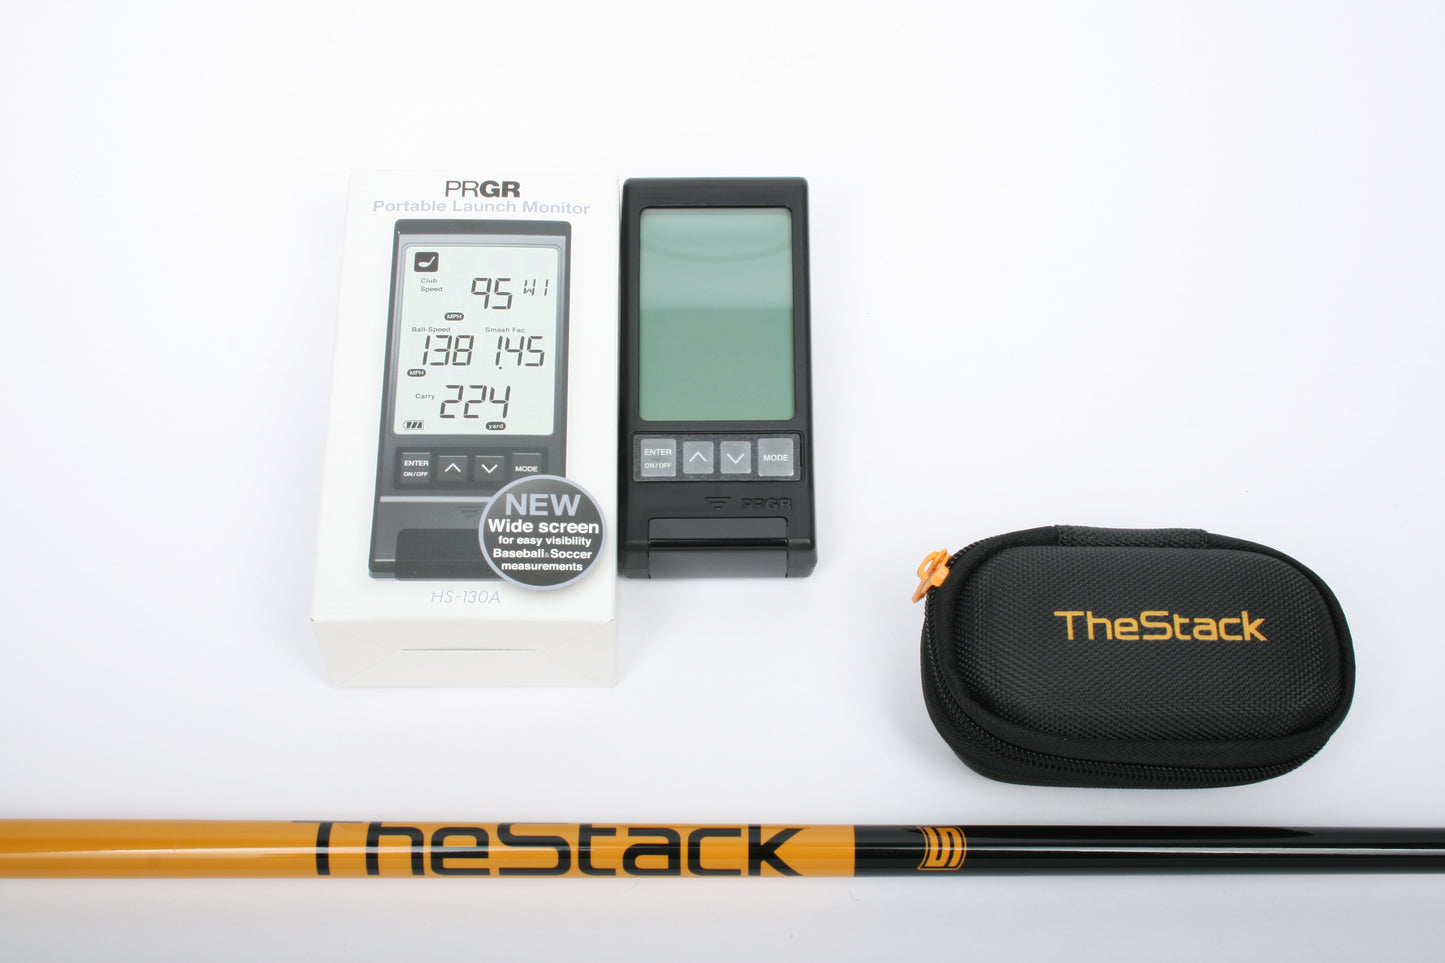 TheStack System - SwingSpeed Training Device